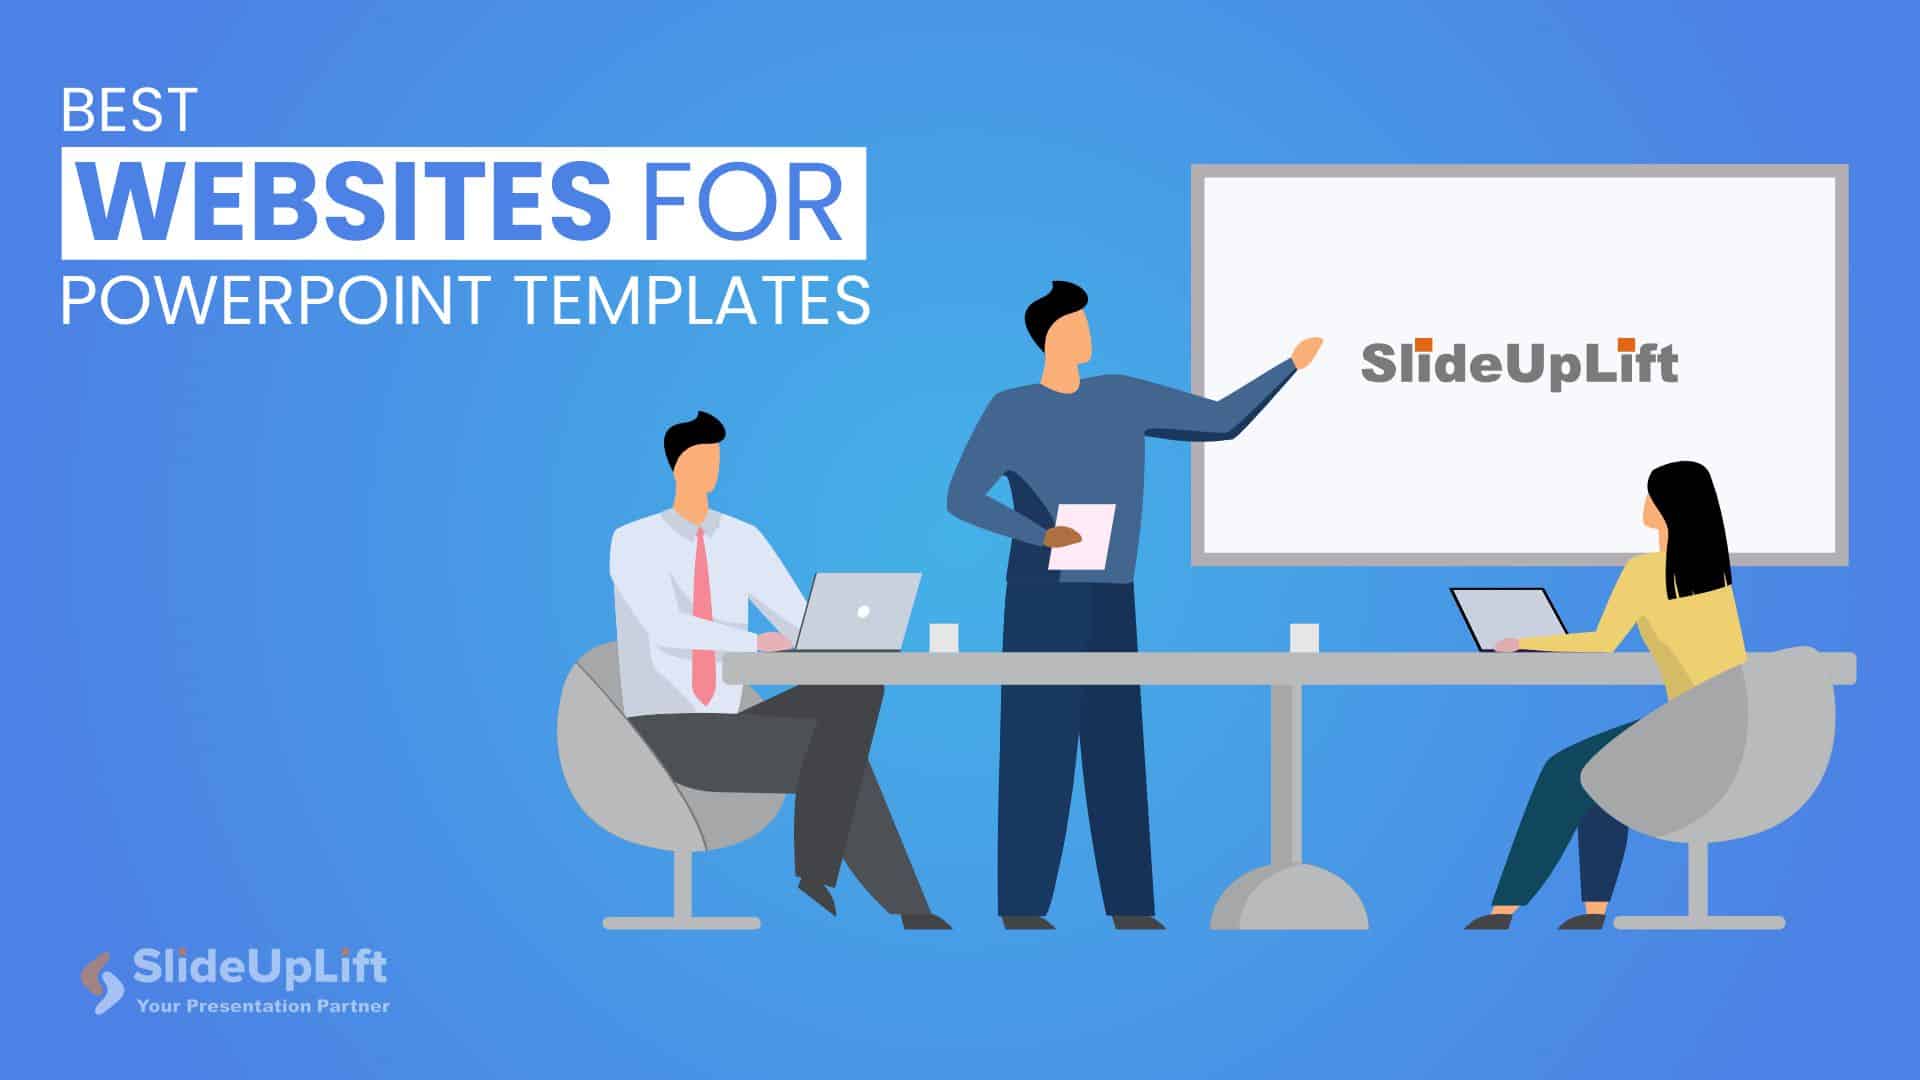 5 Best Websites For PowerPoint Templates